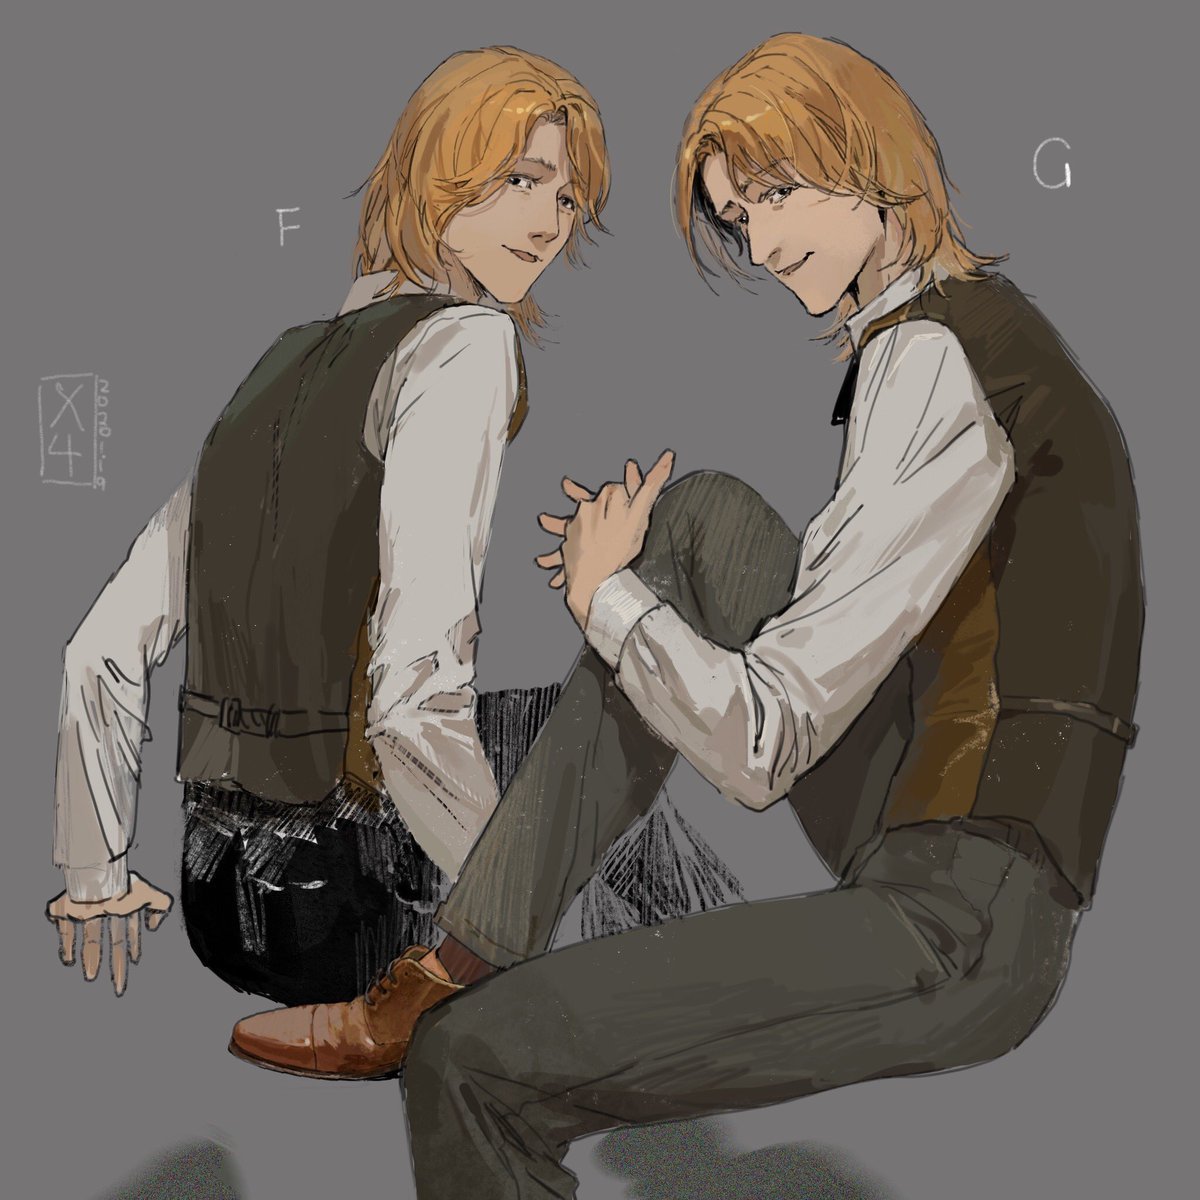 Fred and george weasley threesome smut